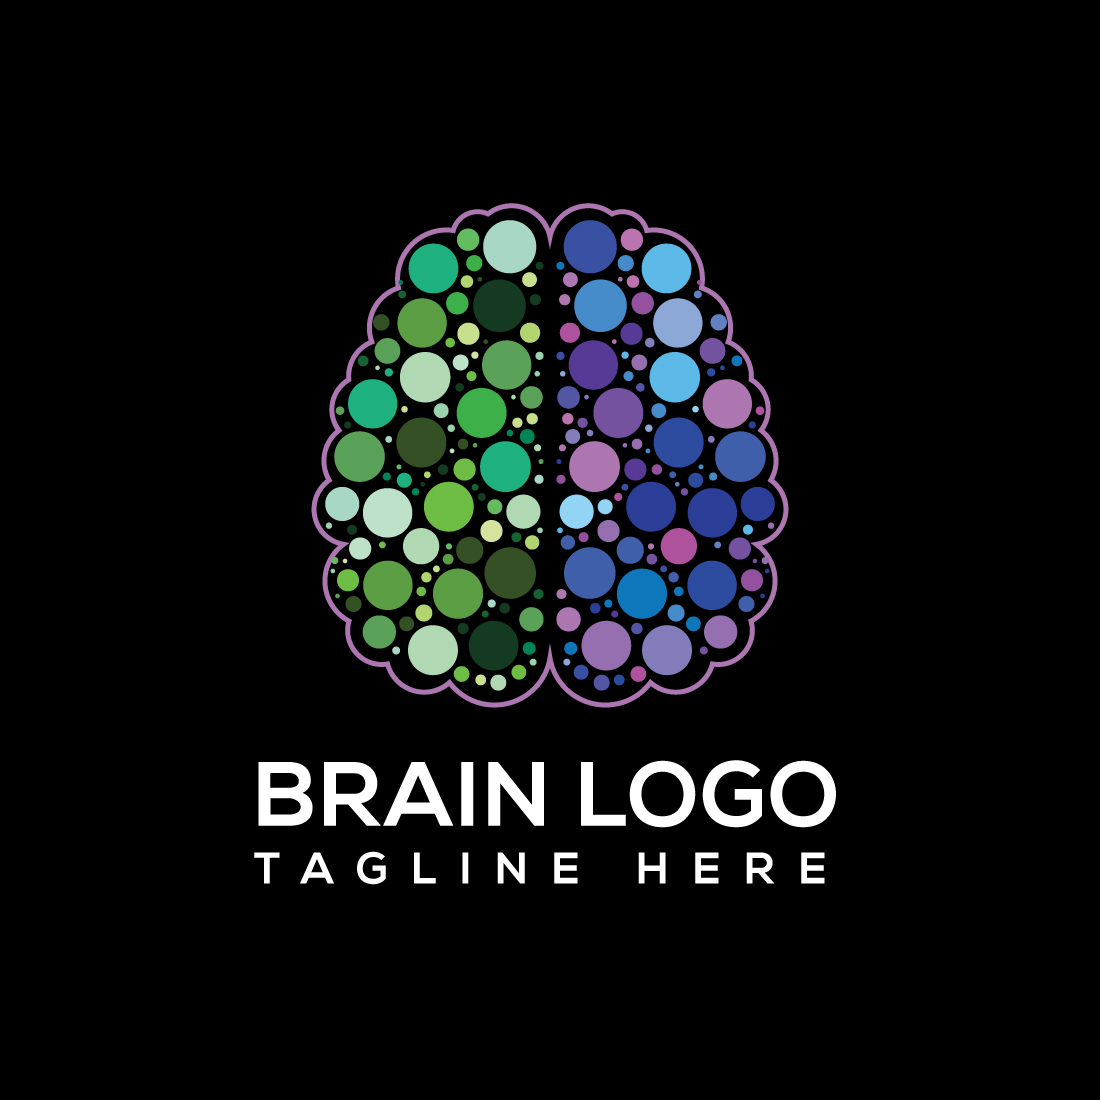 Brain Logo Design Vector Template with black background.